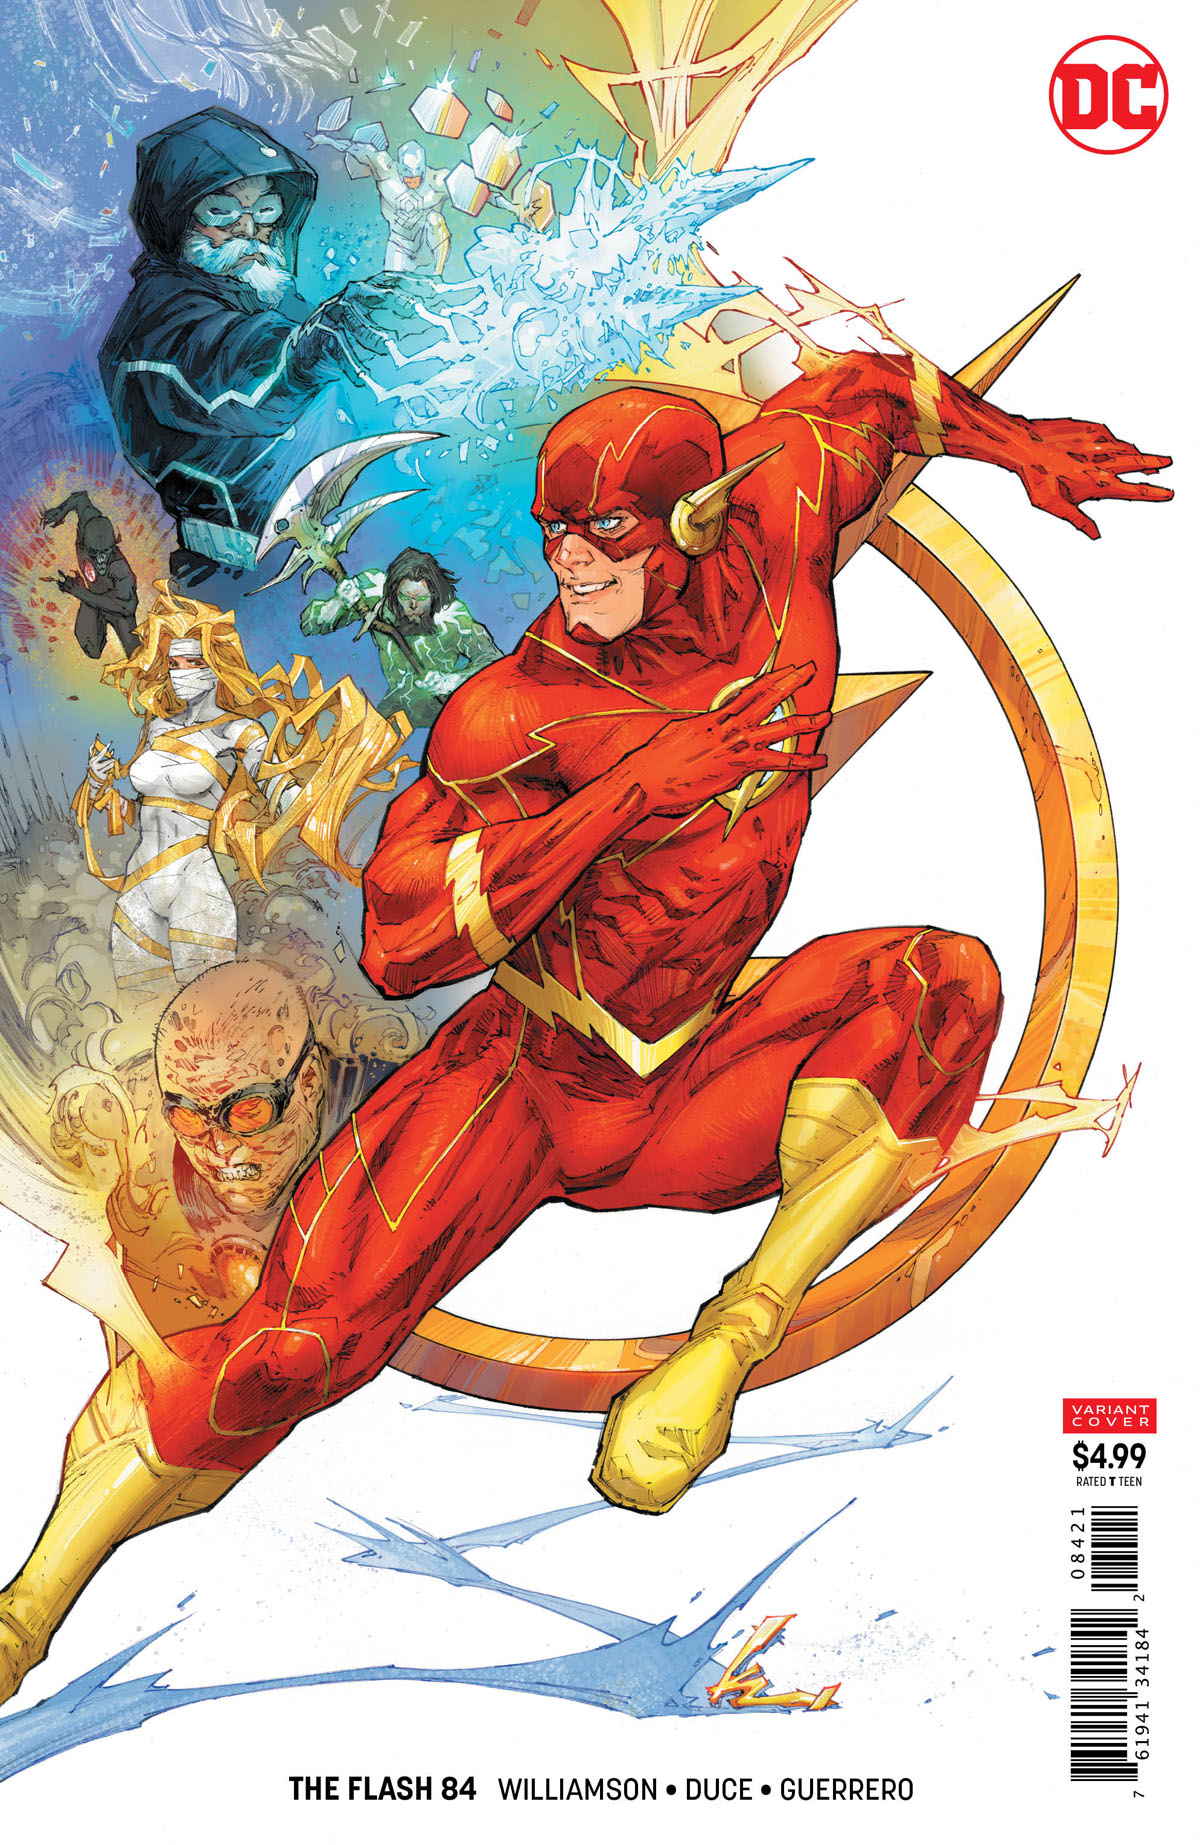 The Flash #84 variant cover